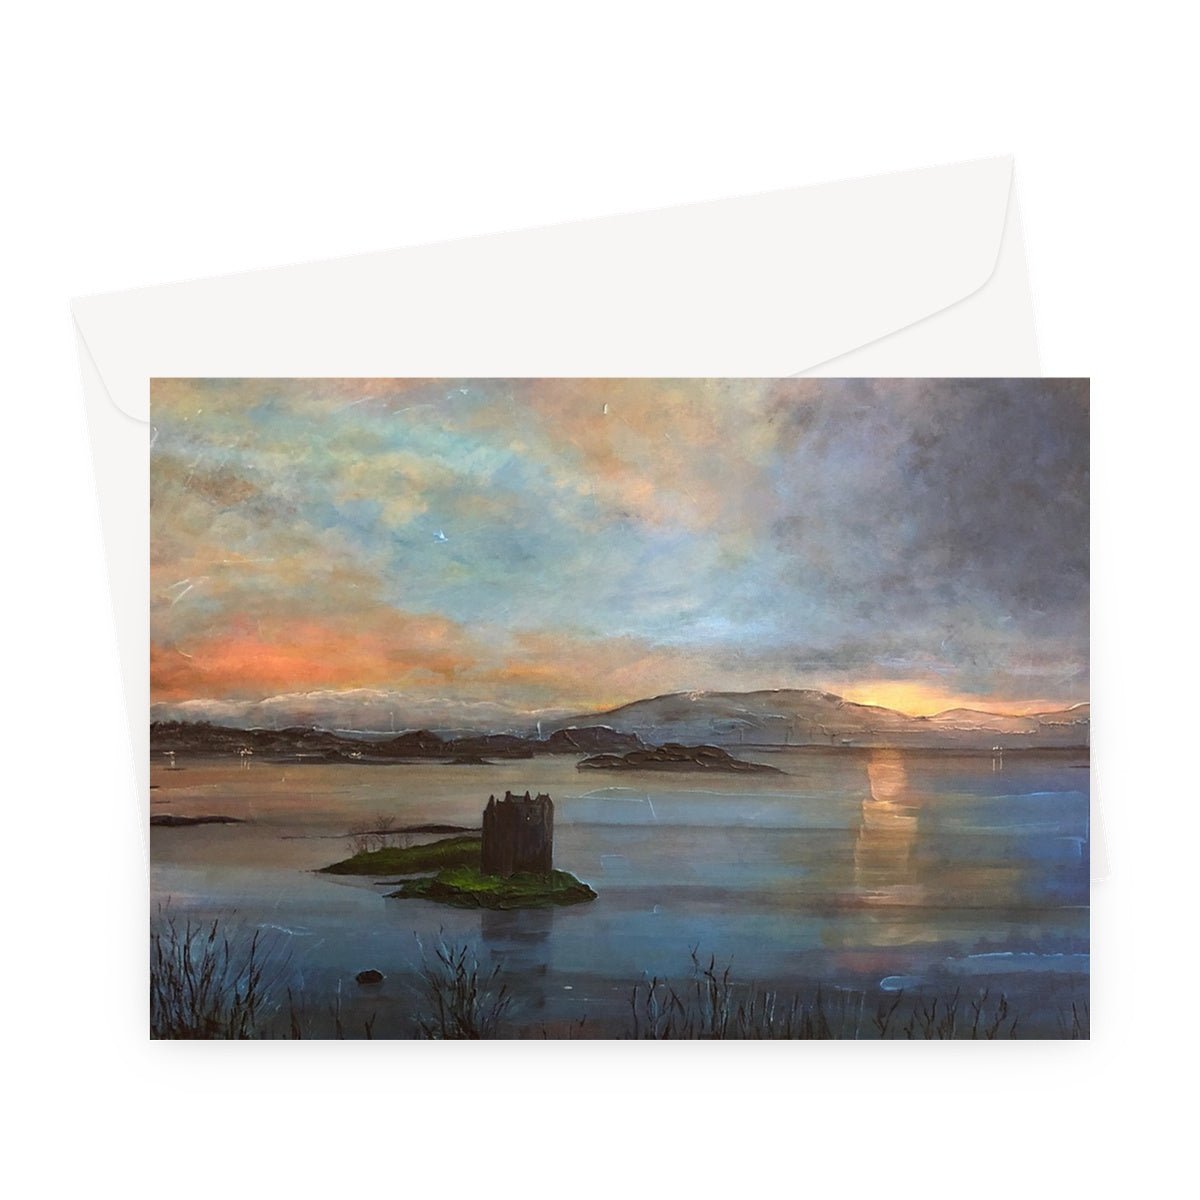 Castle Stalker Twilight Art Gifts Greeting Card-Greetings Cards-Historic & Iconic Scotland Art Gallery-A5 Landscape-1 Card-Paintings, Prints, Homeware, Art Gifts From Scotland By Scottish Artist Kevin Hunter